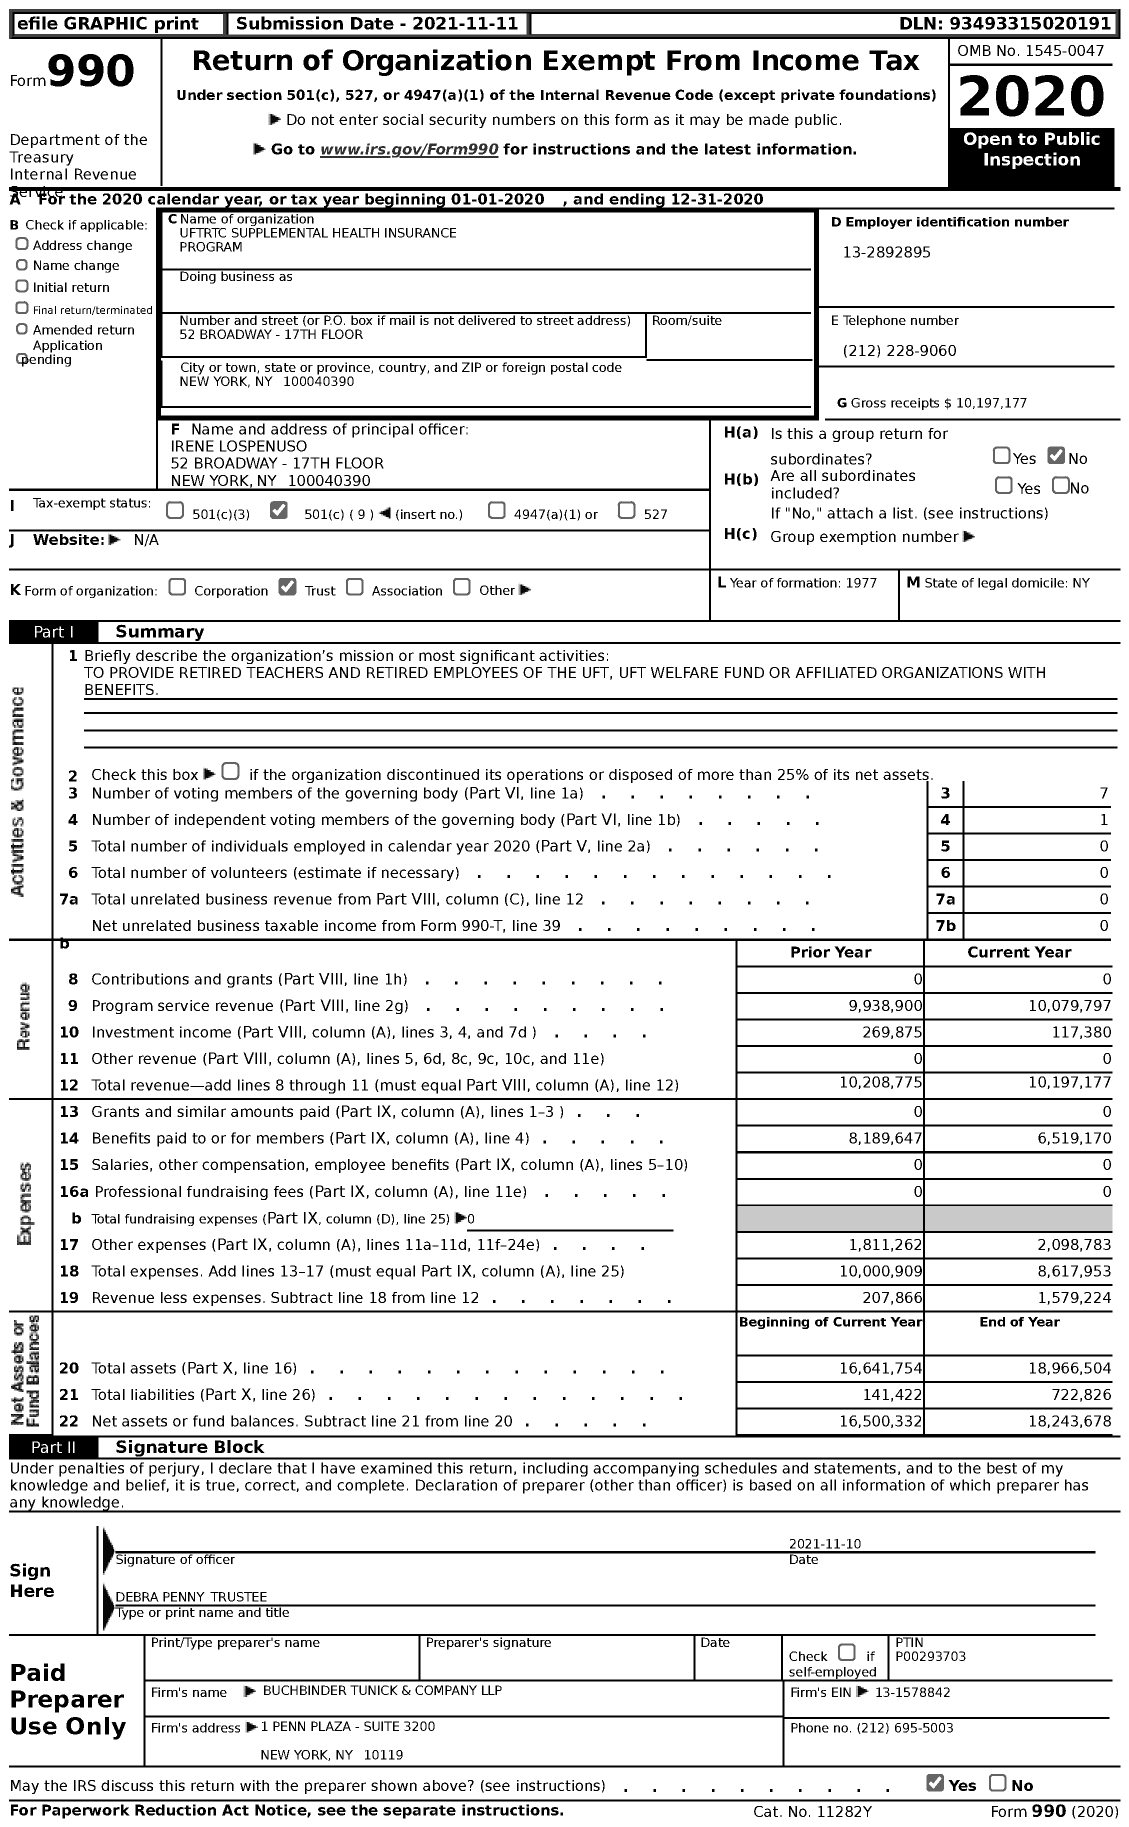 Image of first page of 2020 Form 990 for Uftrtc Supplemental Health Insurance Program